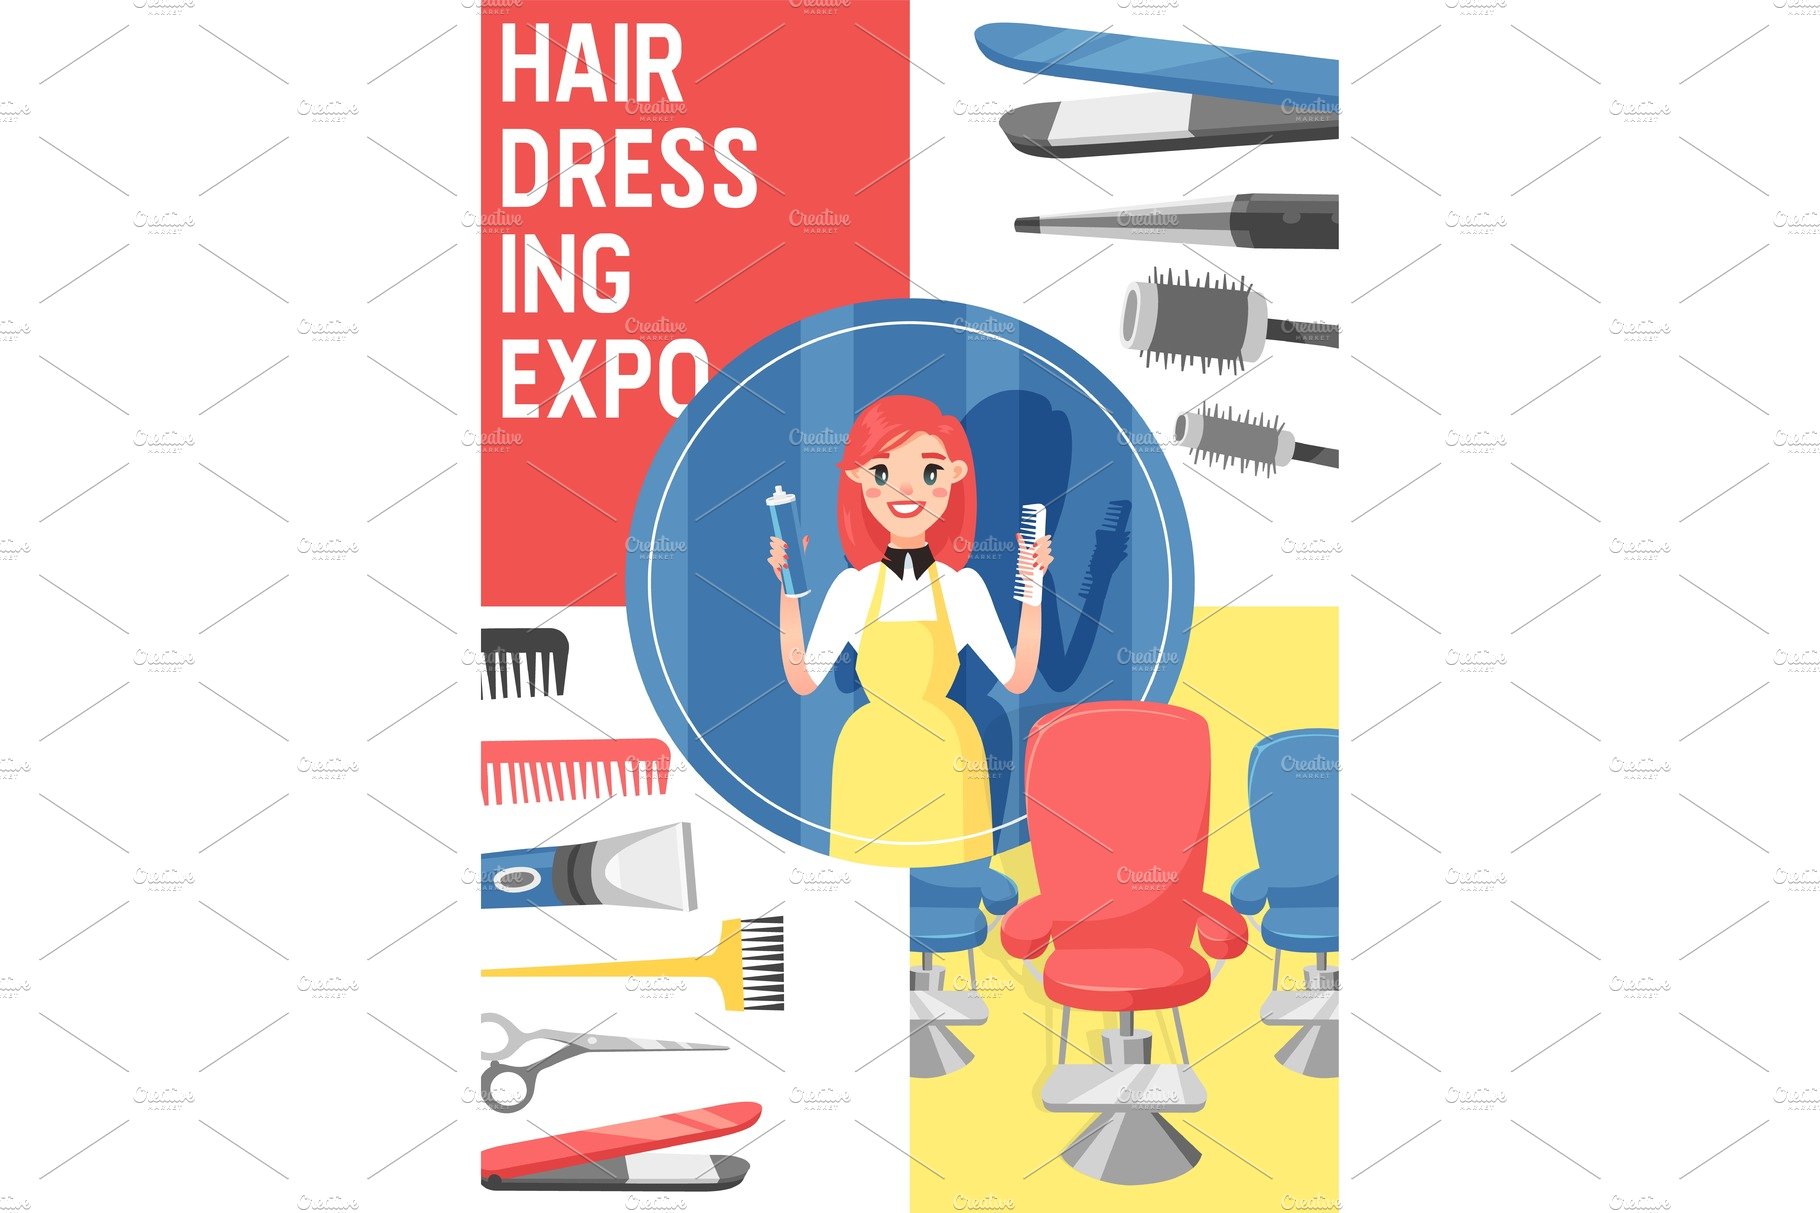 Hairdressing expo, beauty salon cover image.